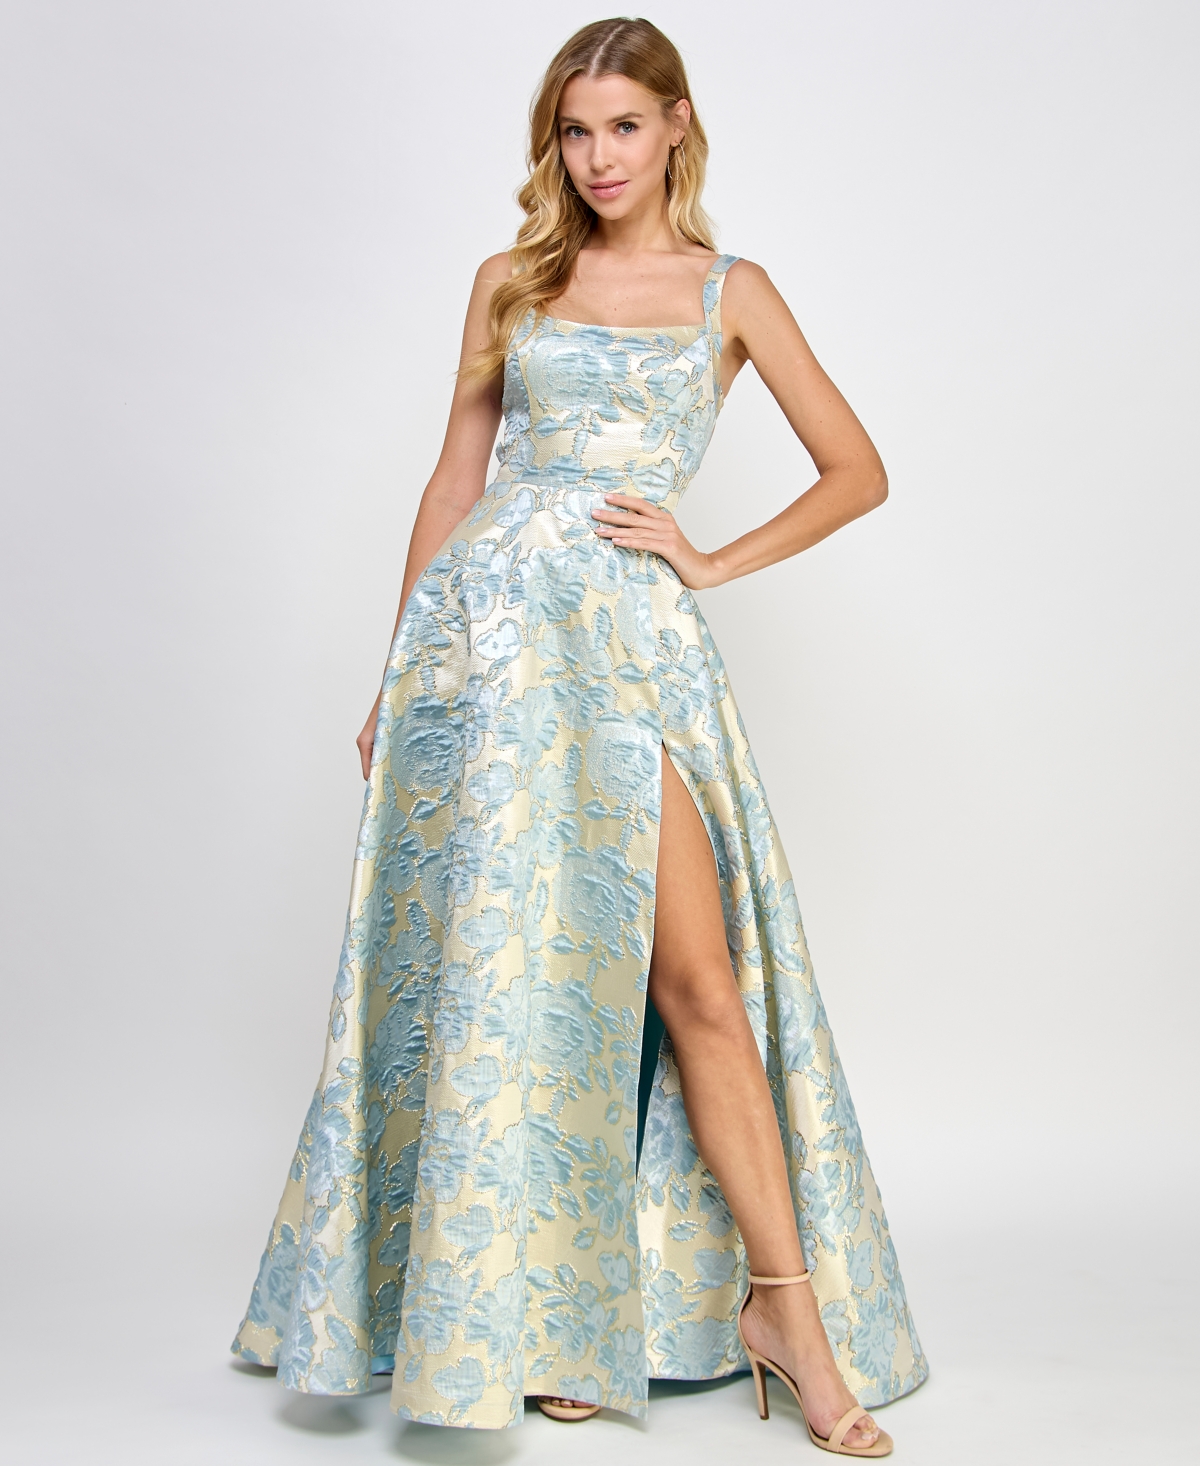 B Darlin Juniors' Jacquard Side-Slit Lace-Up-Back Gown, Created for Macy's  - Cream/Blue/Gold